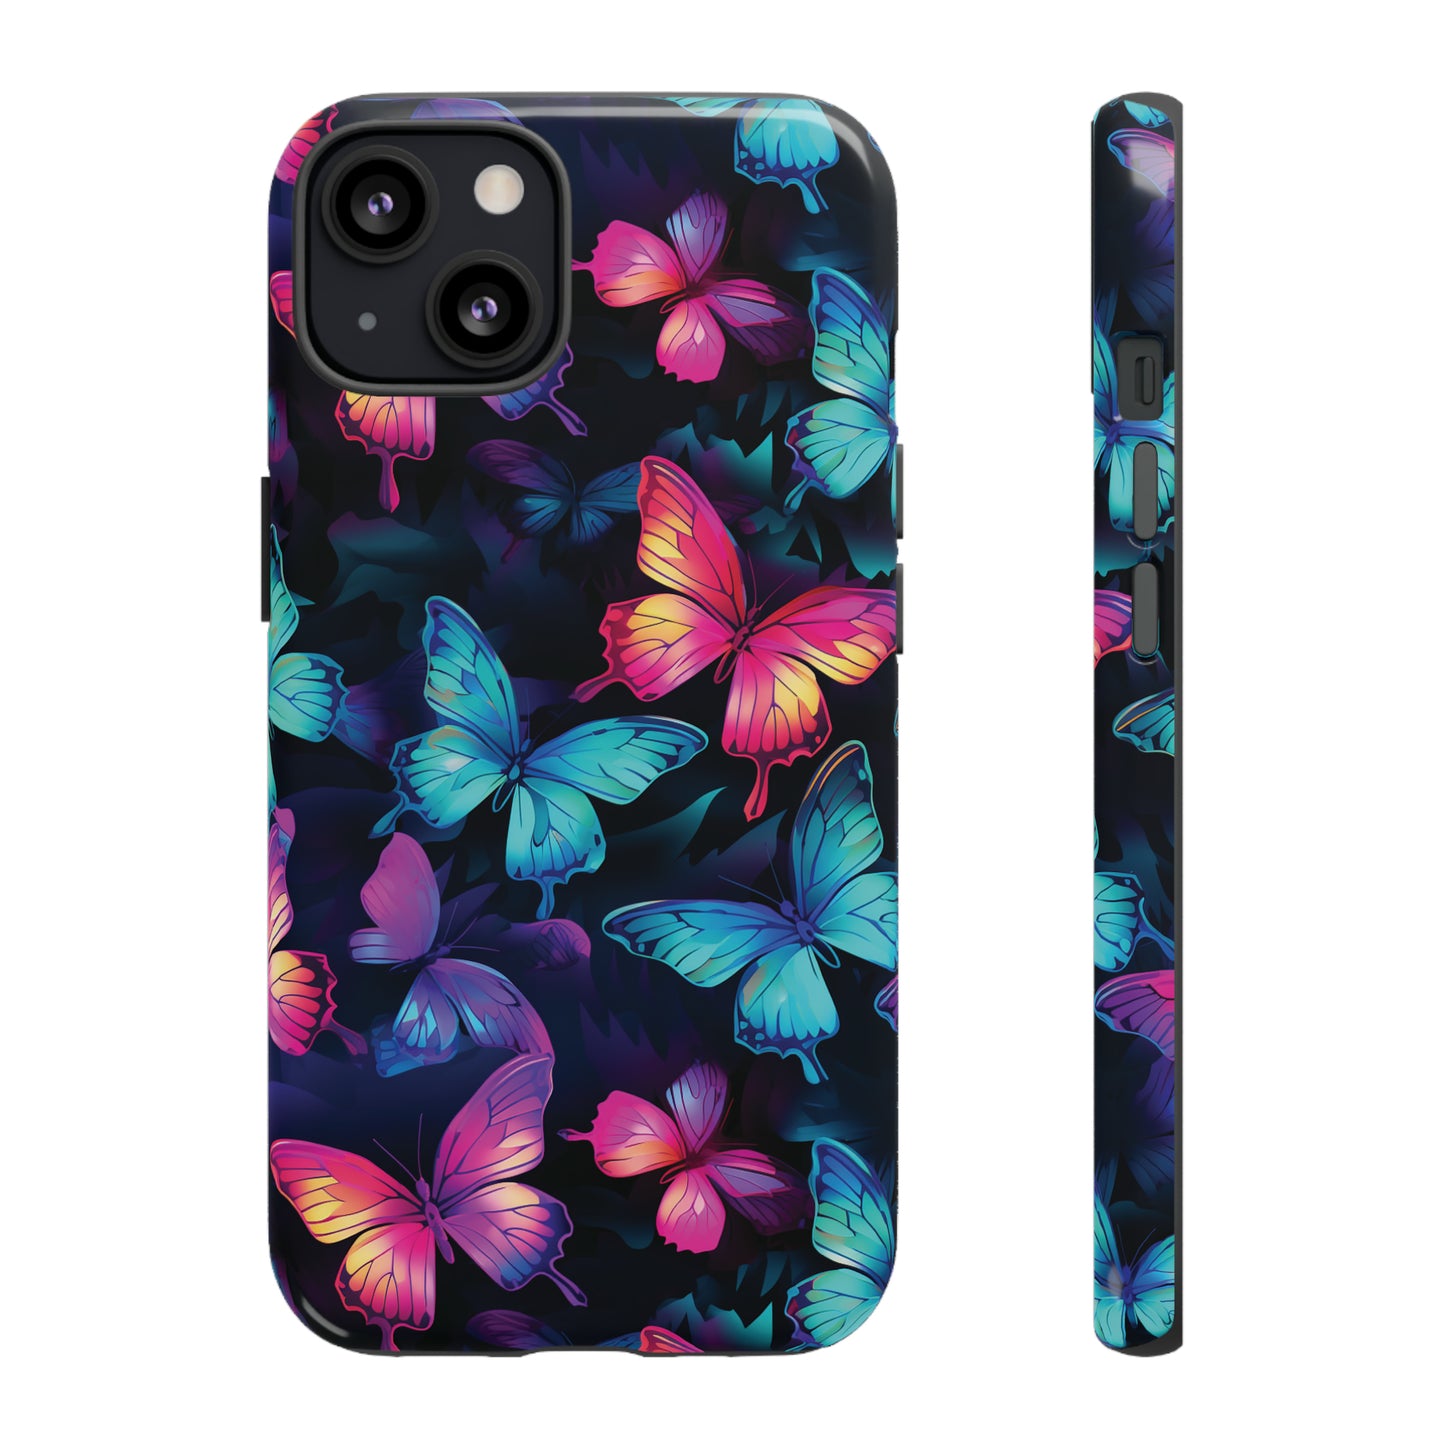 Neon Butterfly Phone Case for iPhone, Samsung Galaxy, Google Pixel